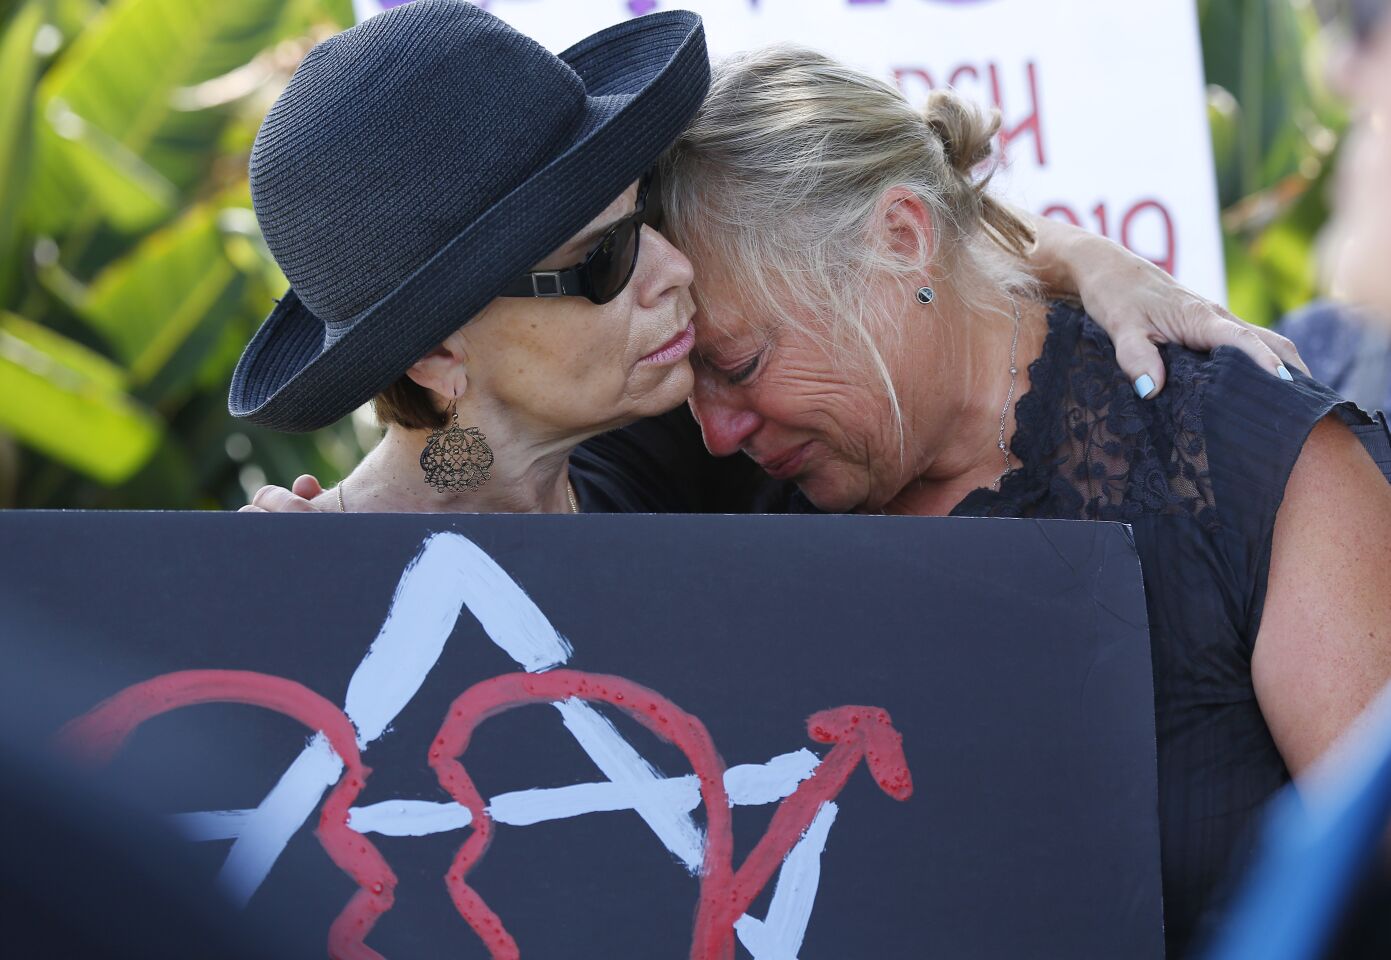 Leslie Gollub, left, and Gretchen Gordon comfort each other as they support the Jewish community at a rally not far from the Chabad of Poway, where a deadly shooting took place the day before on April 28, 2019 in Poway, California.